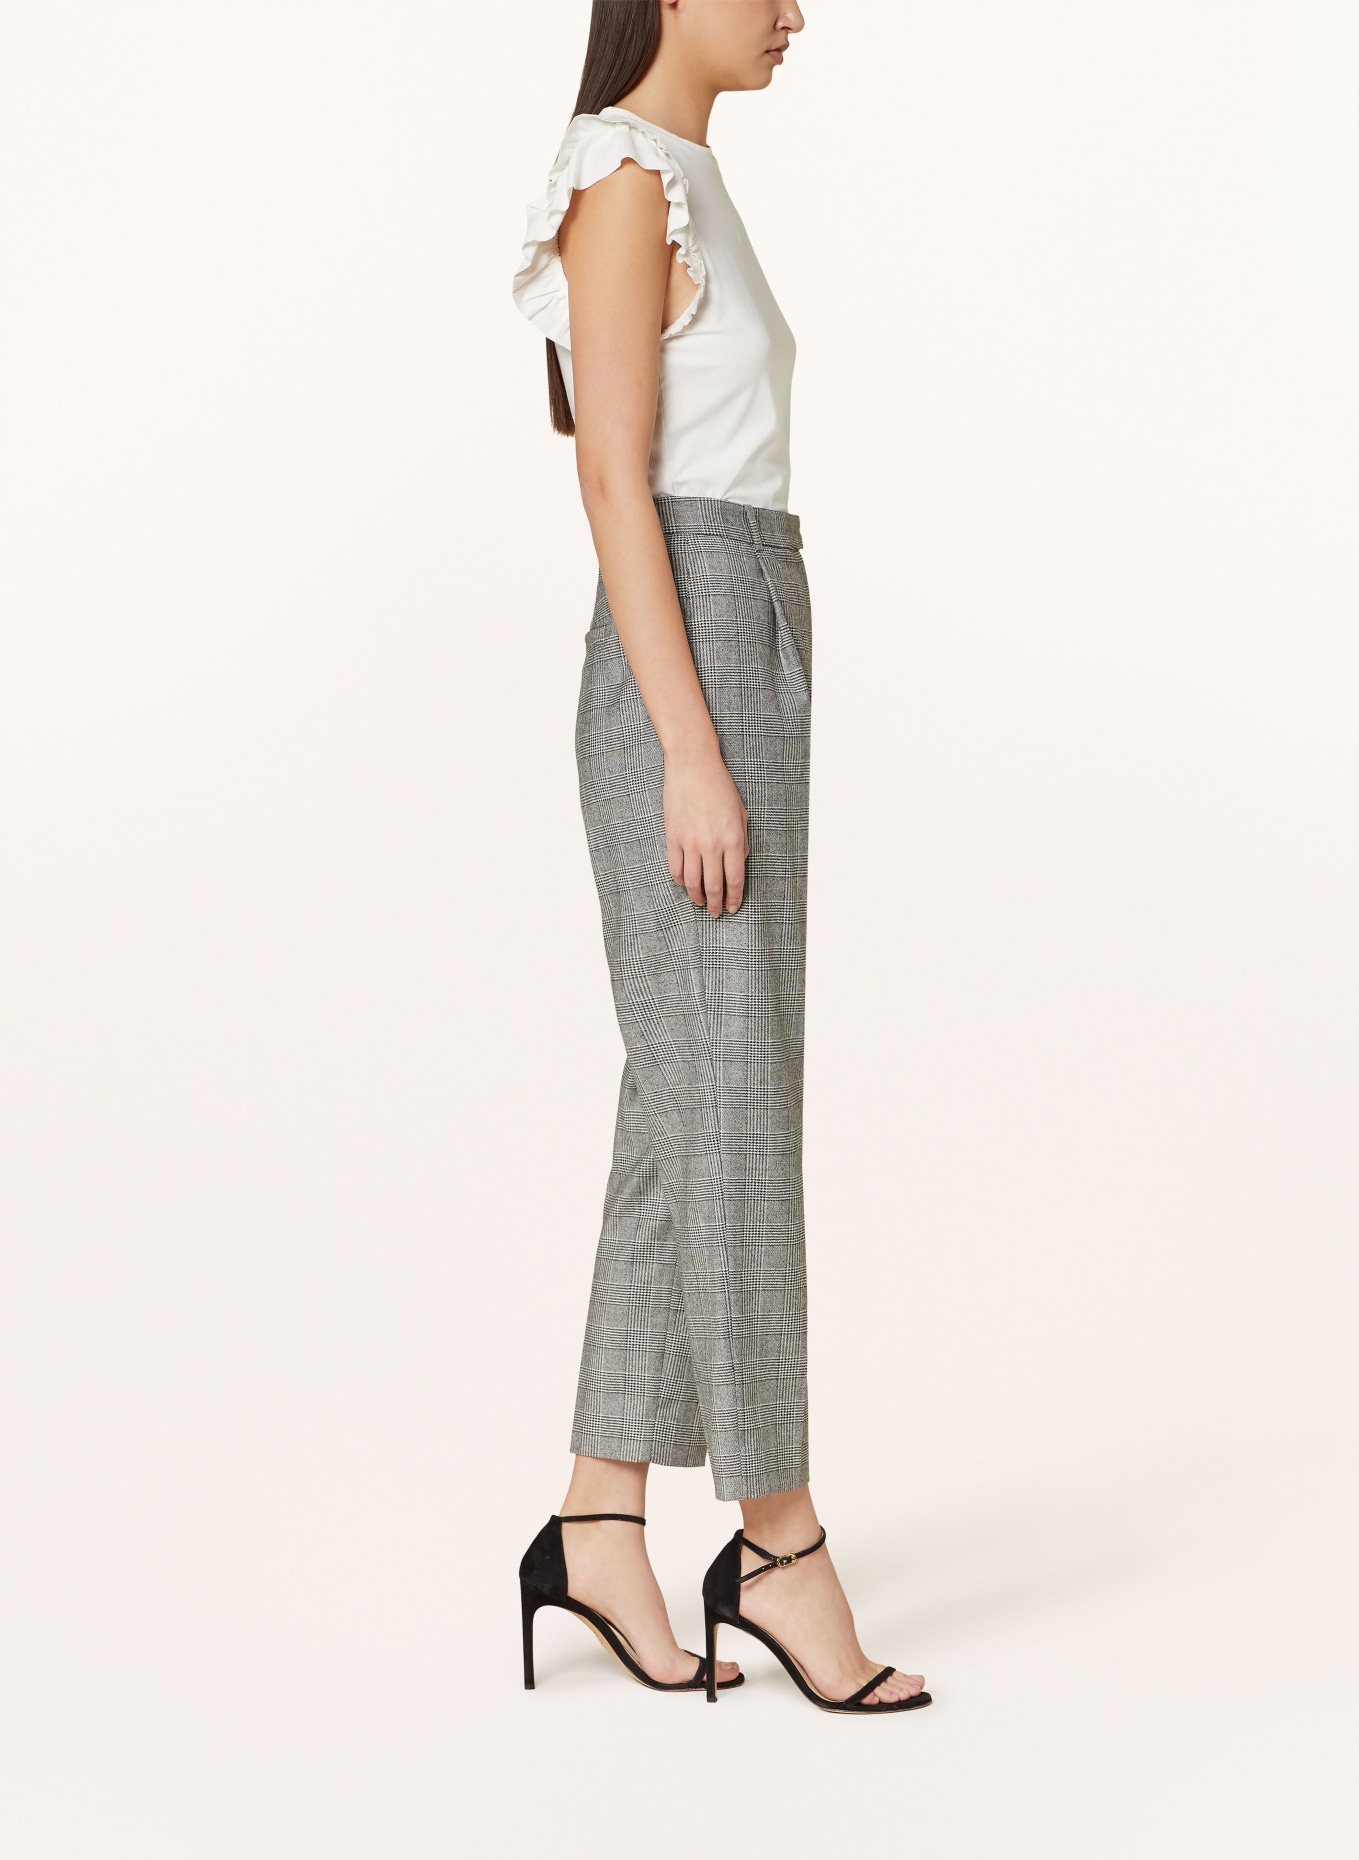 TED BAKER Trousers JOMMIAL, Color: GRAY/ LIGHT GRAY/ BLACK (Image 4)